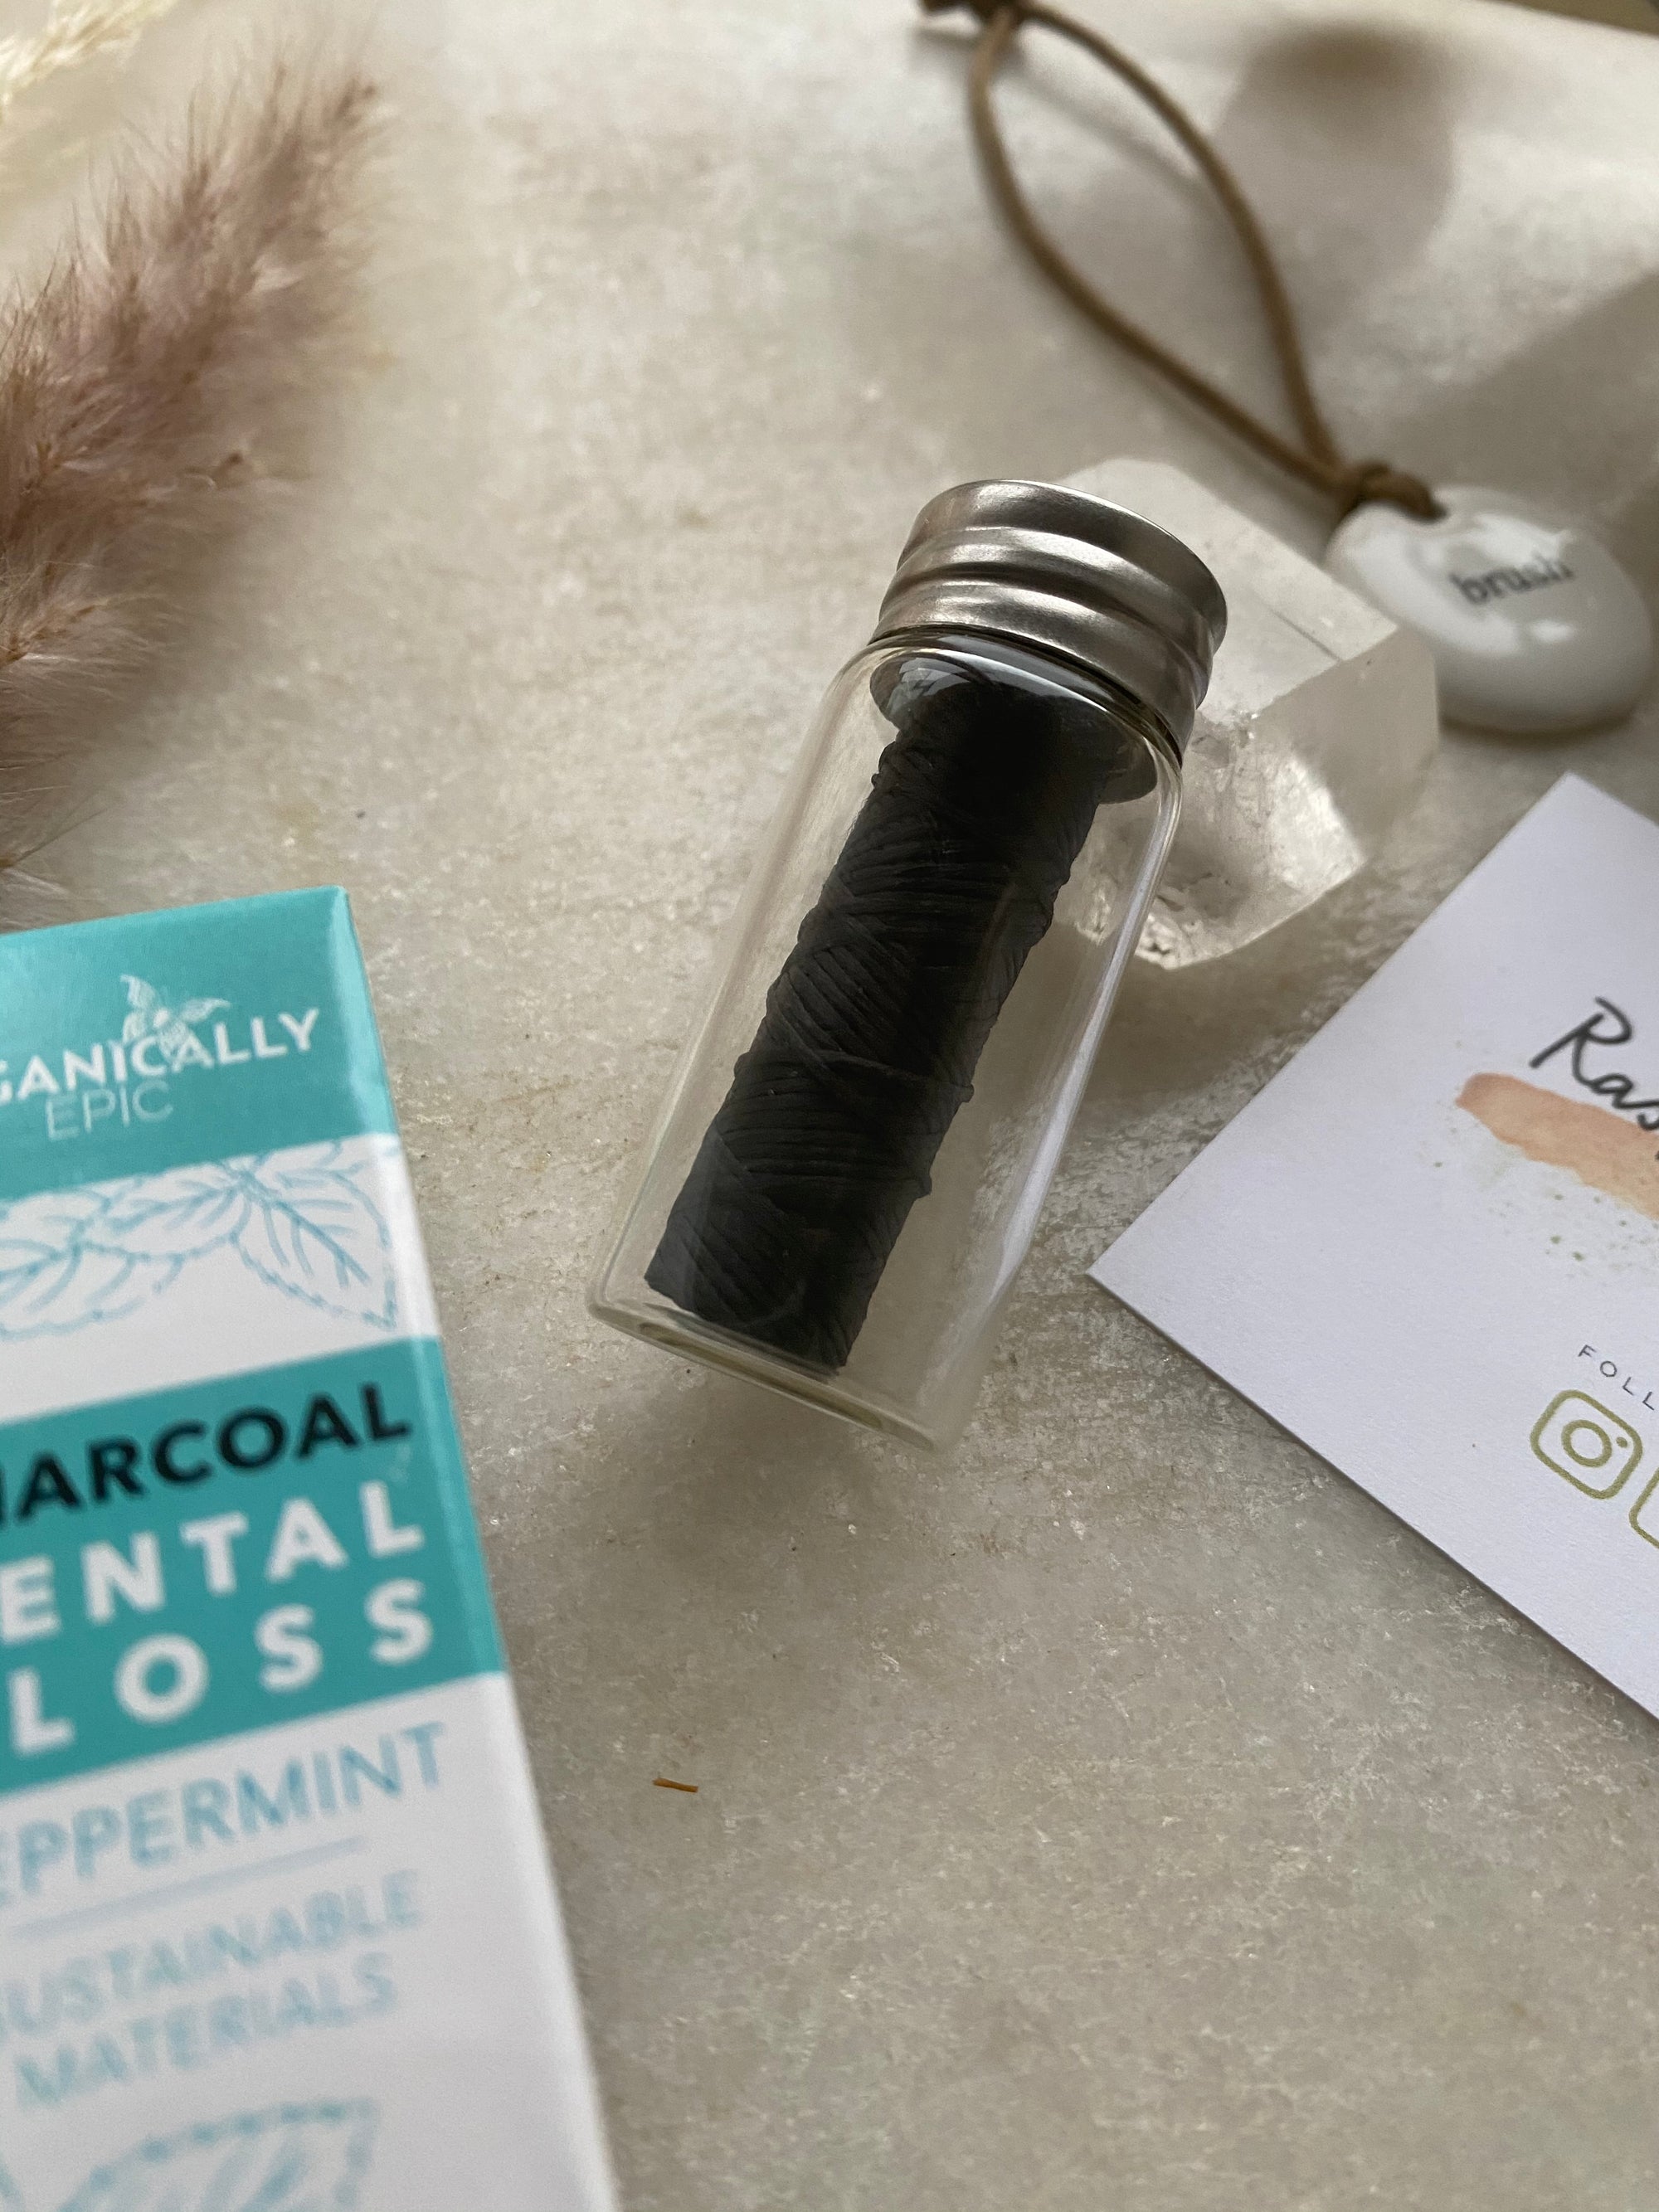 Organically Epic - Charcoal Infused Dental Floss